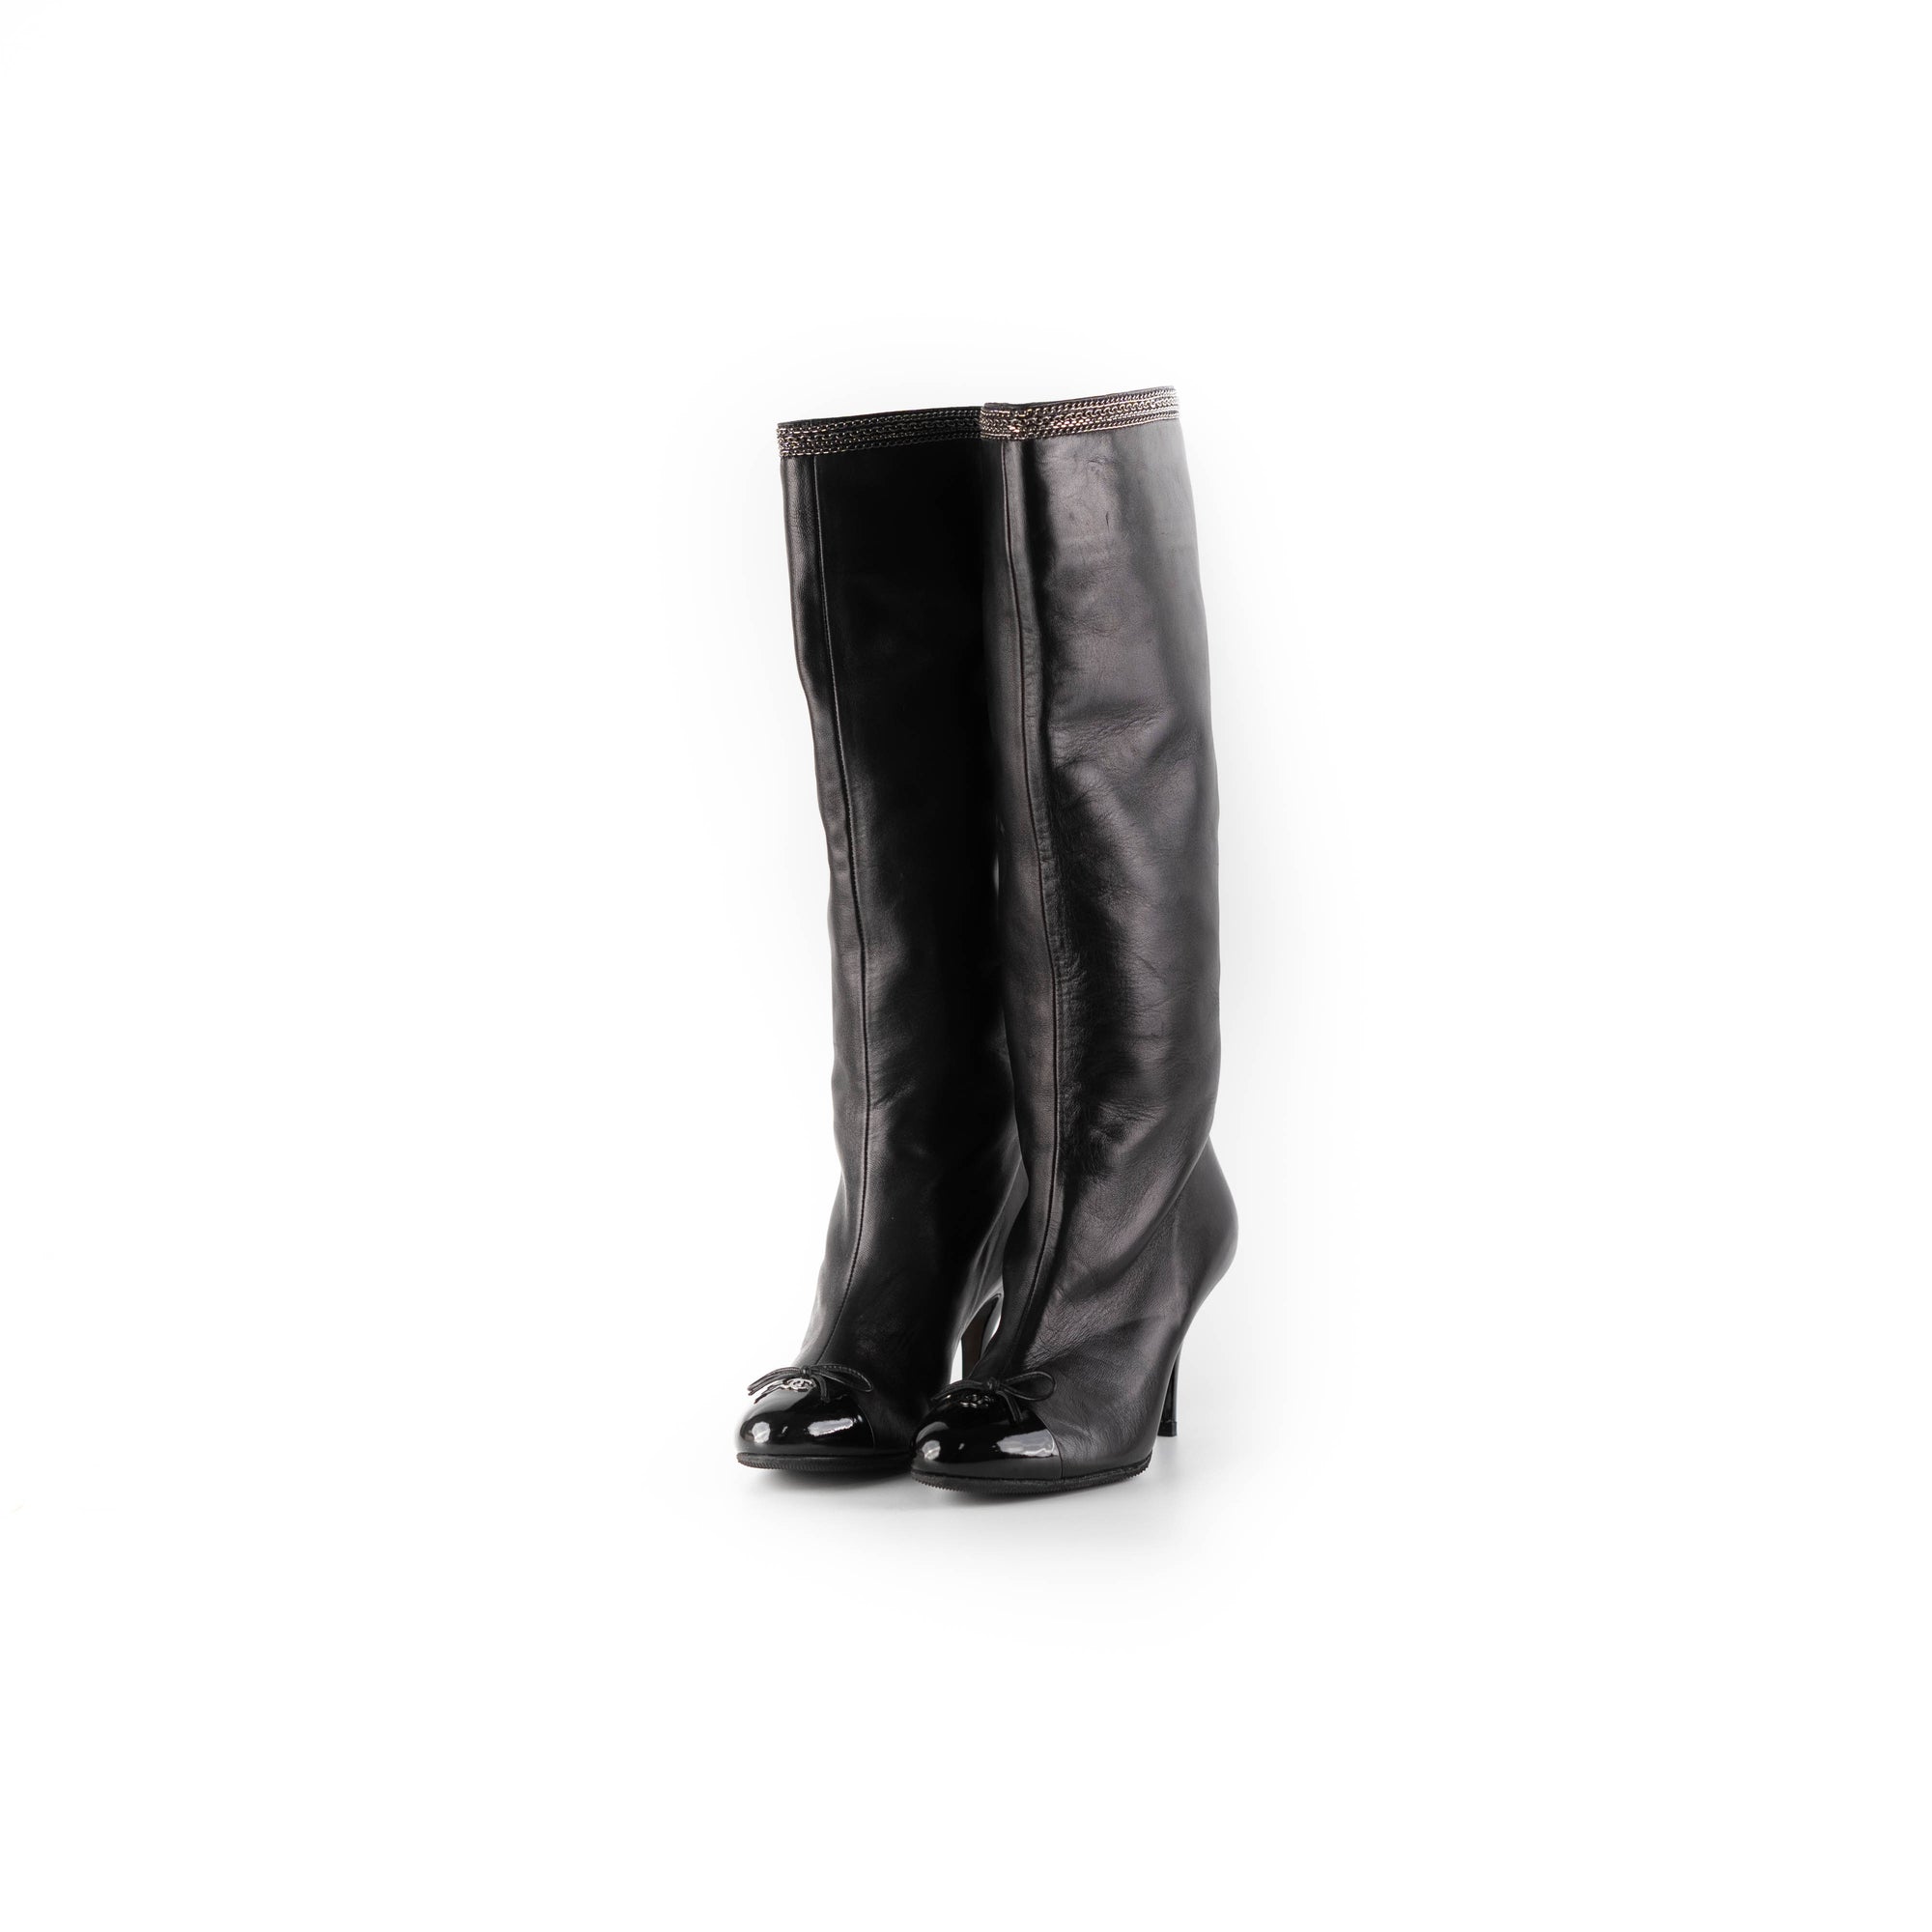 chanel long black boots size